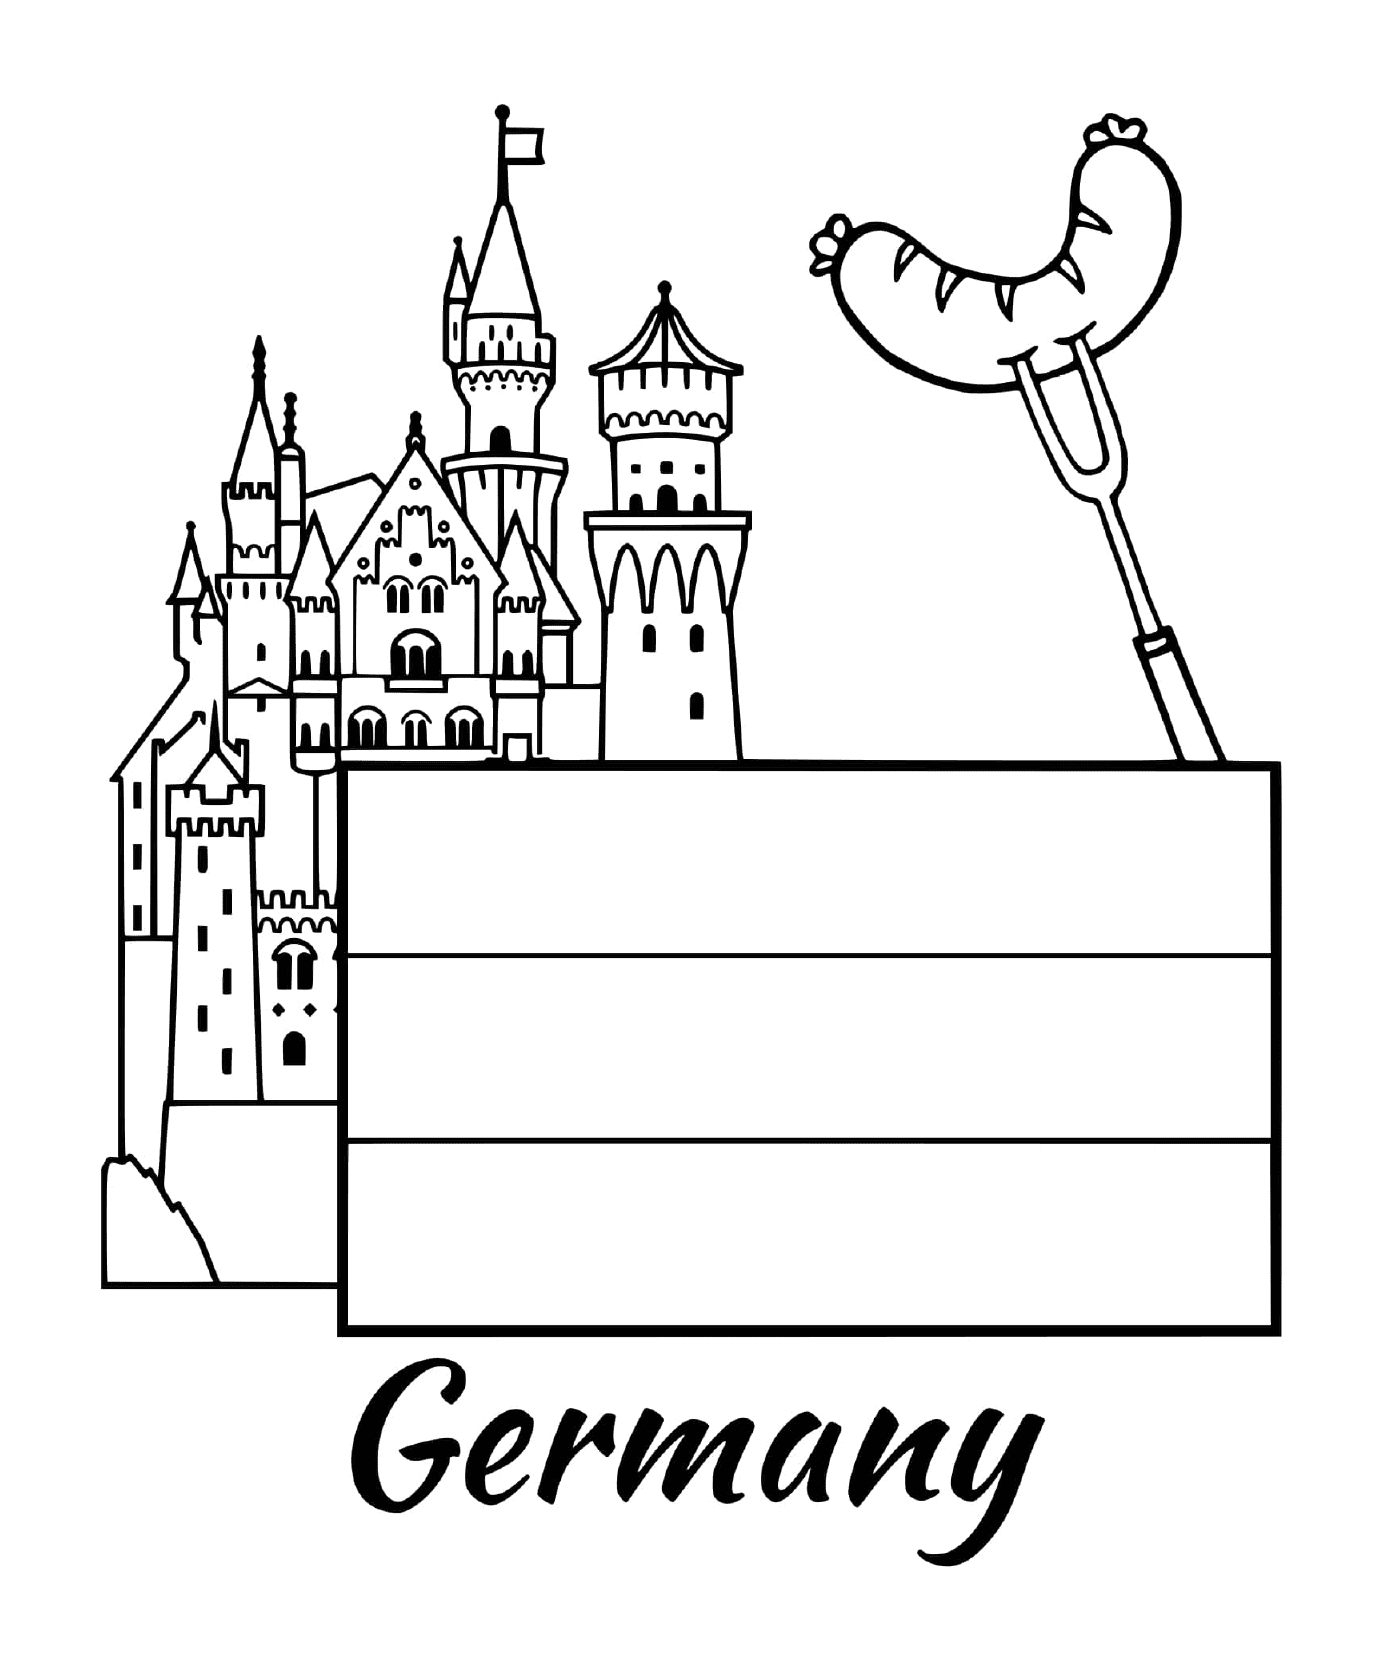  Flag of Germany with a castle 